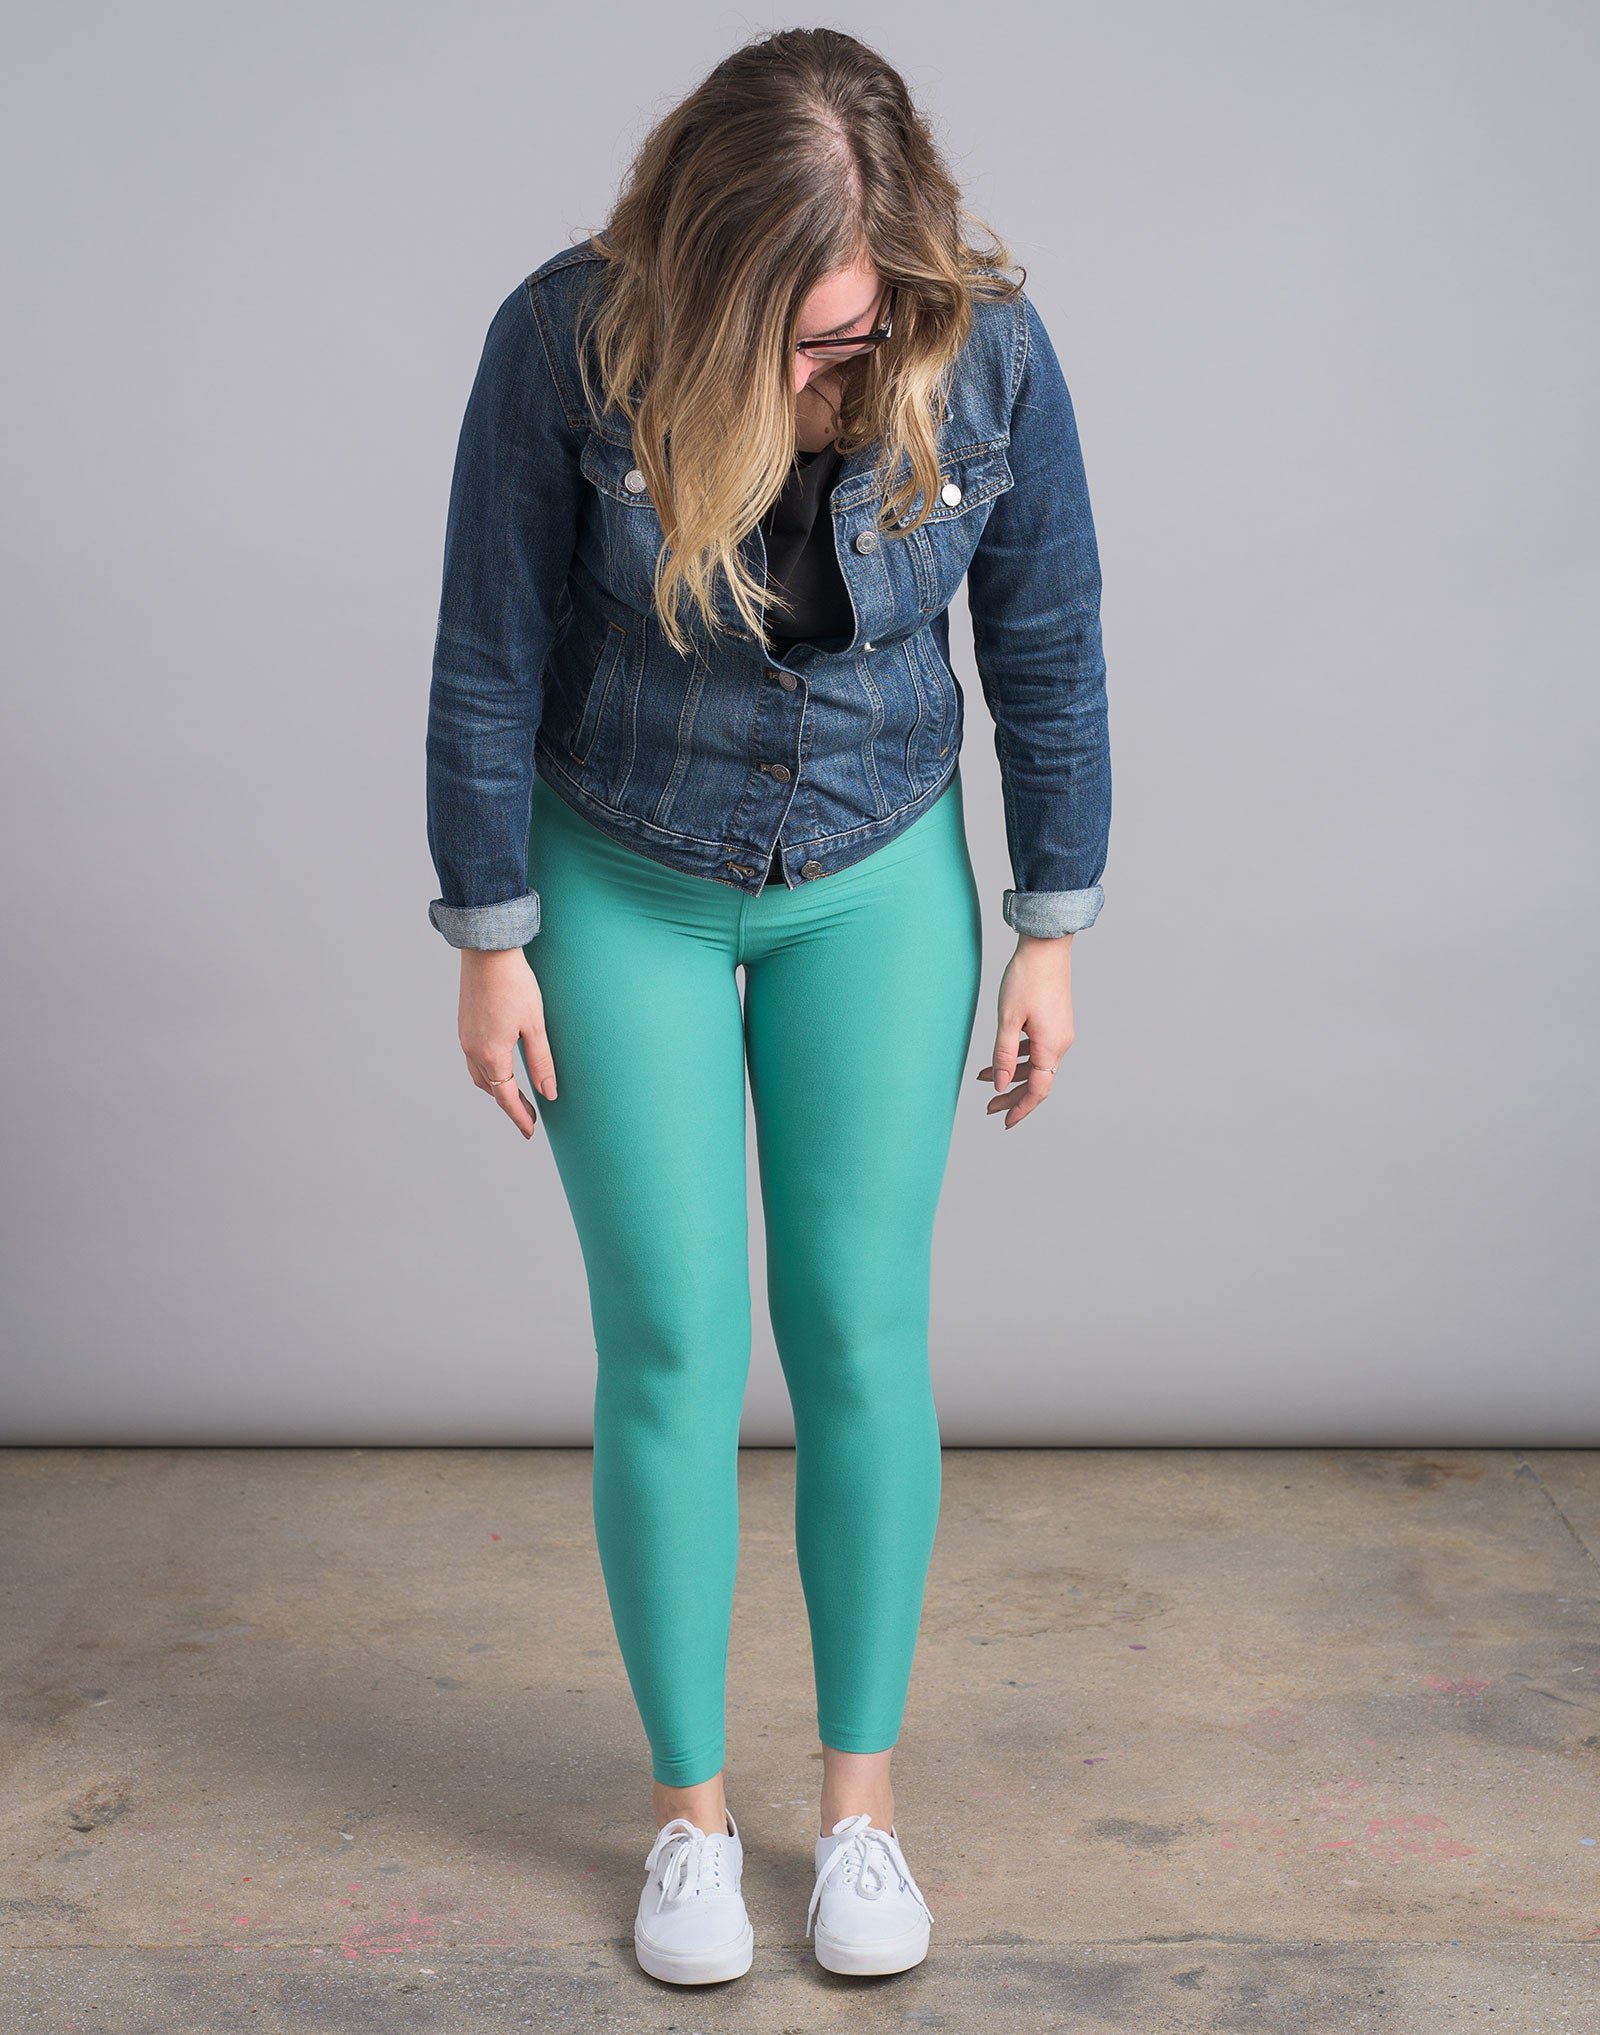 Better Check Your Leggings: LuLaRoe Is in Hot Water Because of